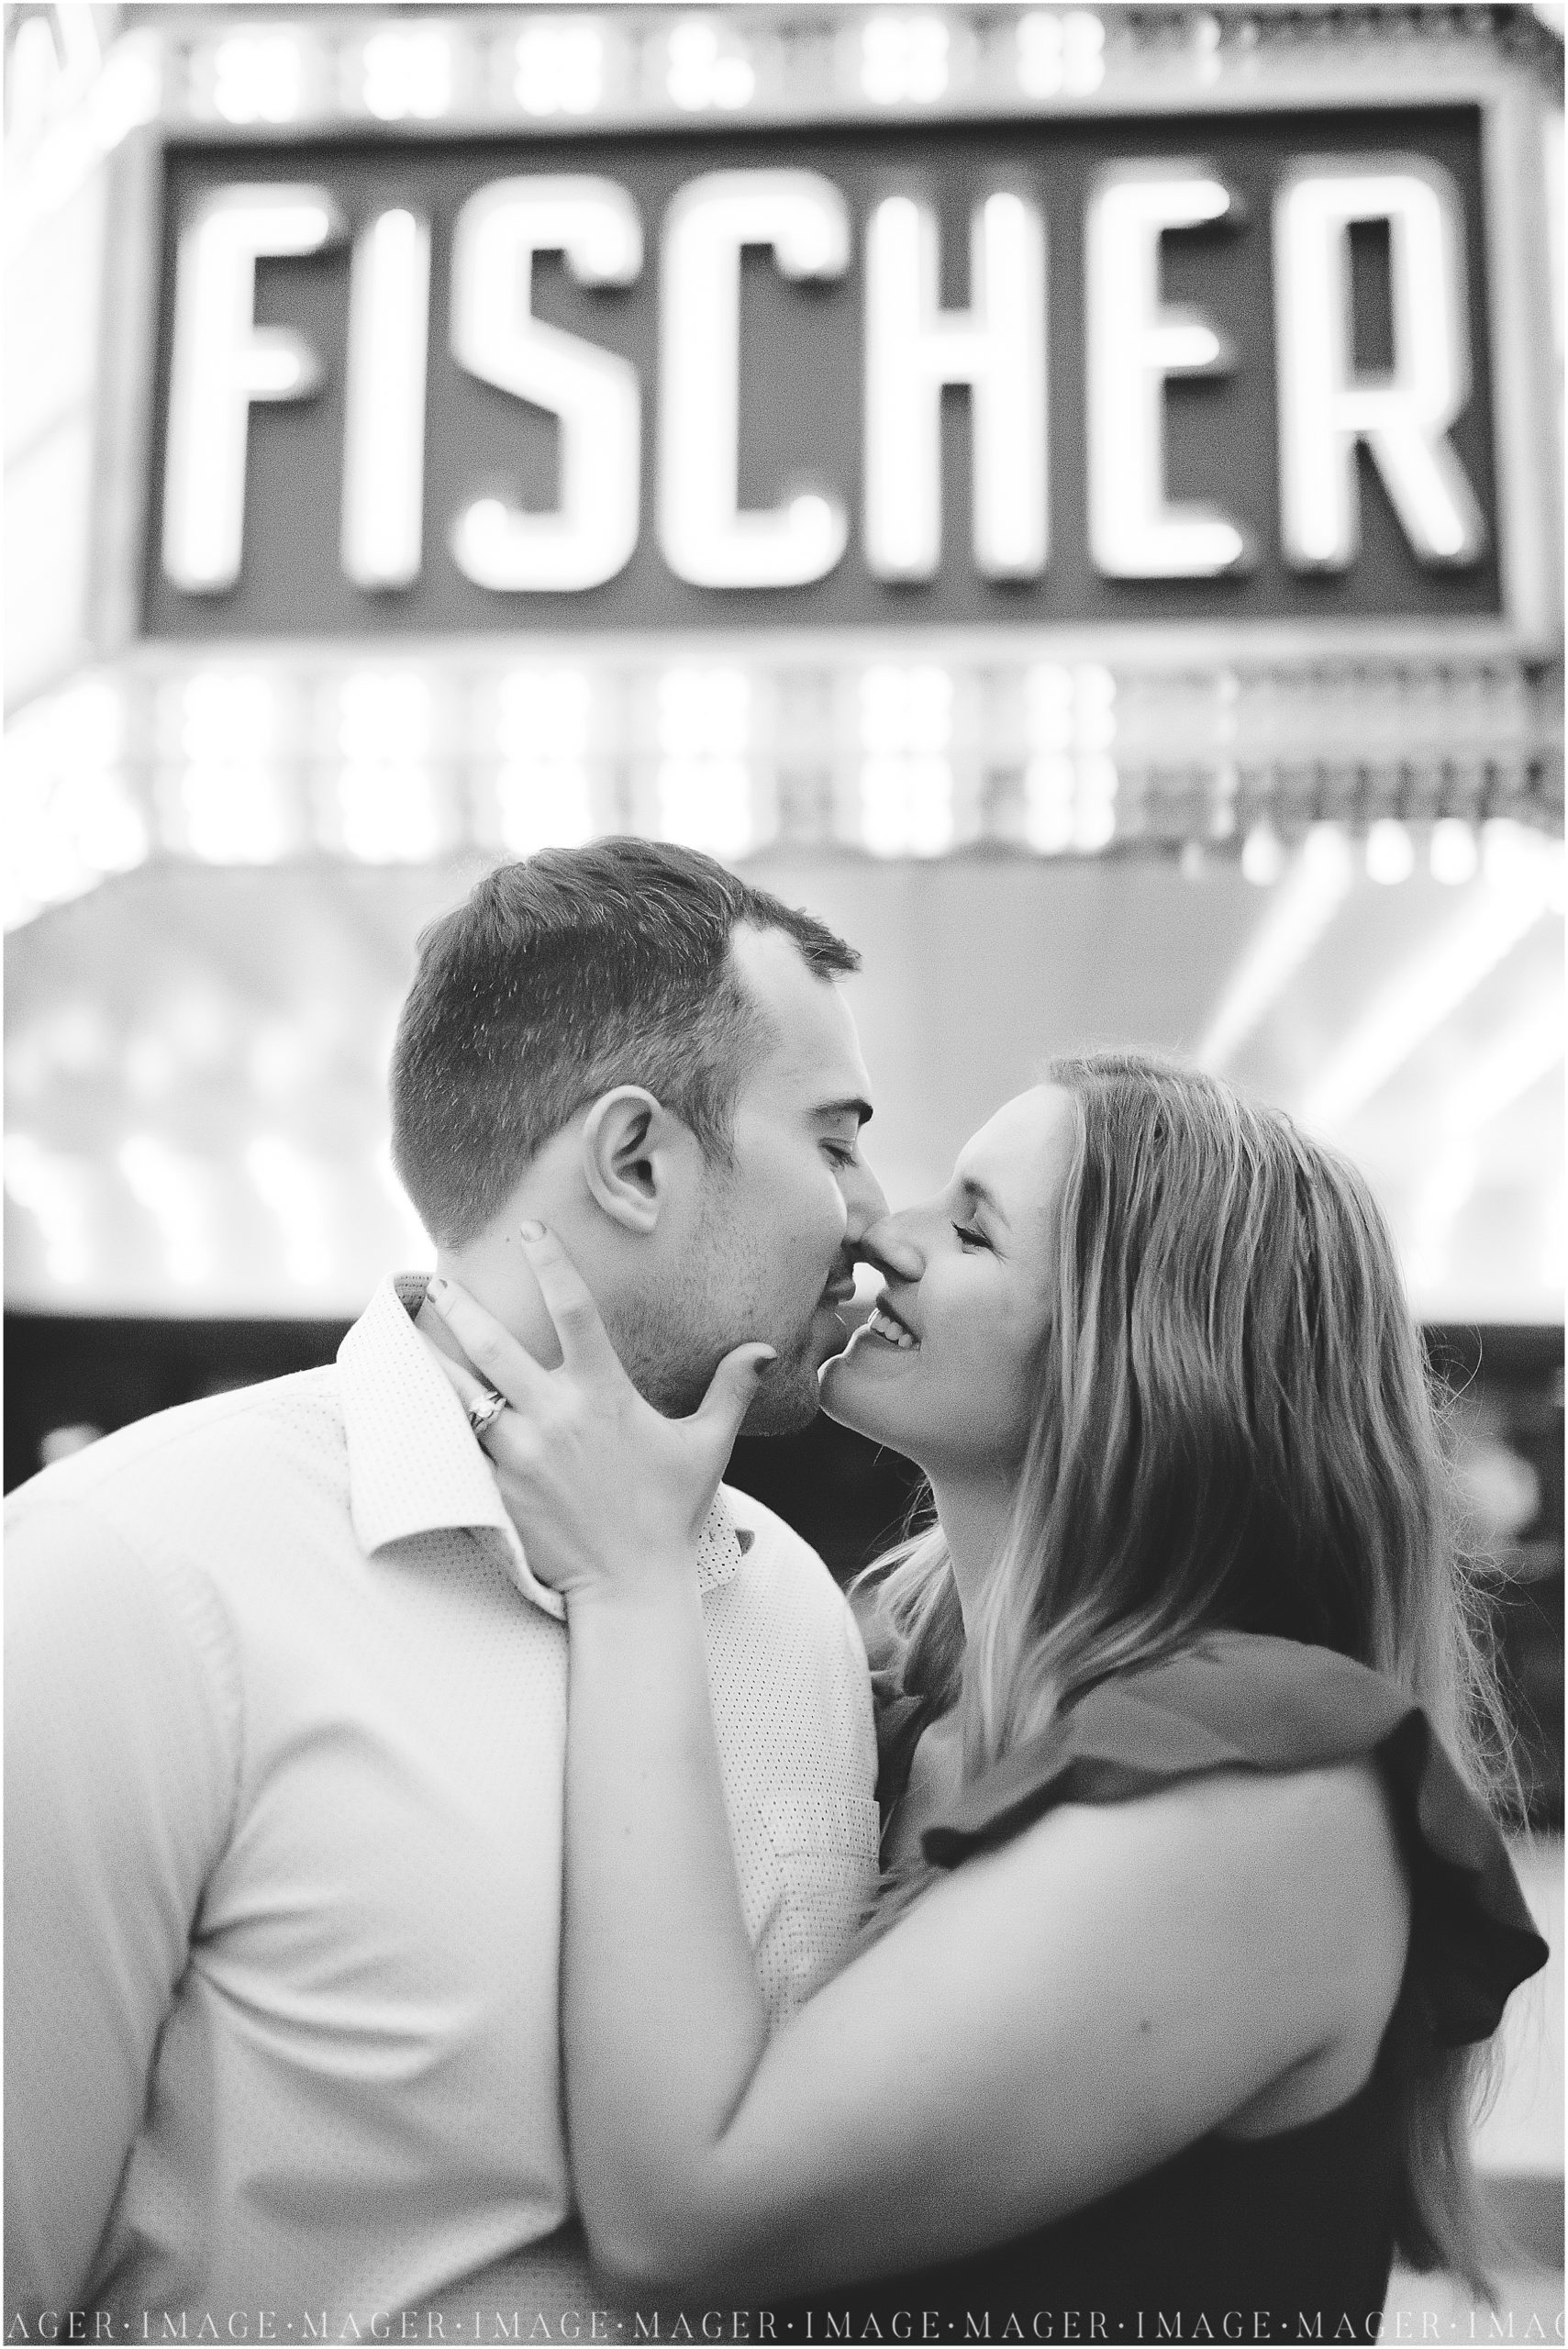 A close up, black and white image of a couple under the Fischer theater marquee sign in downtown Danville.

Photo taken by Mager Image Photography 